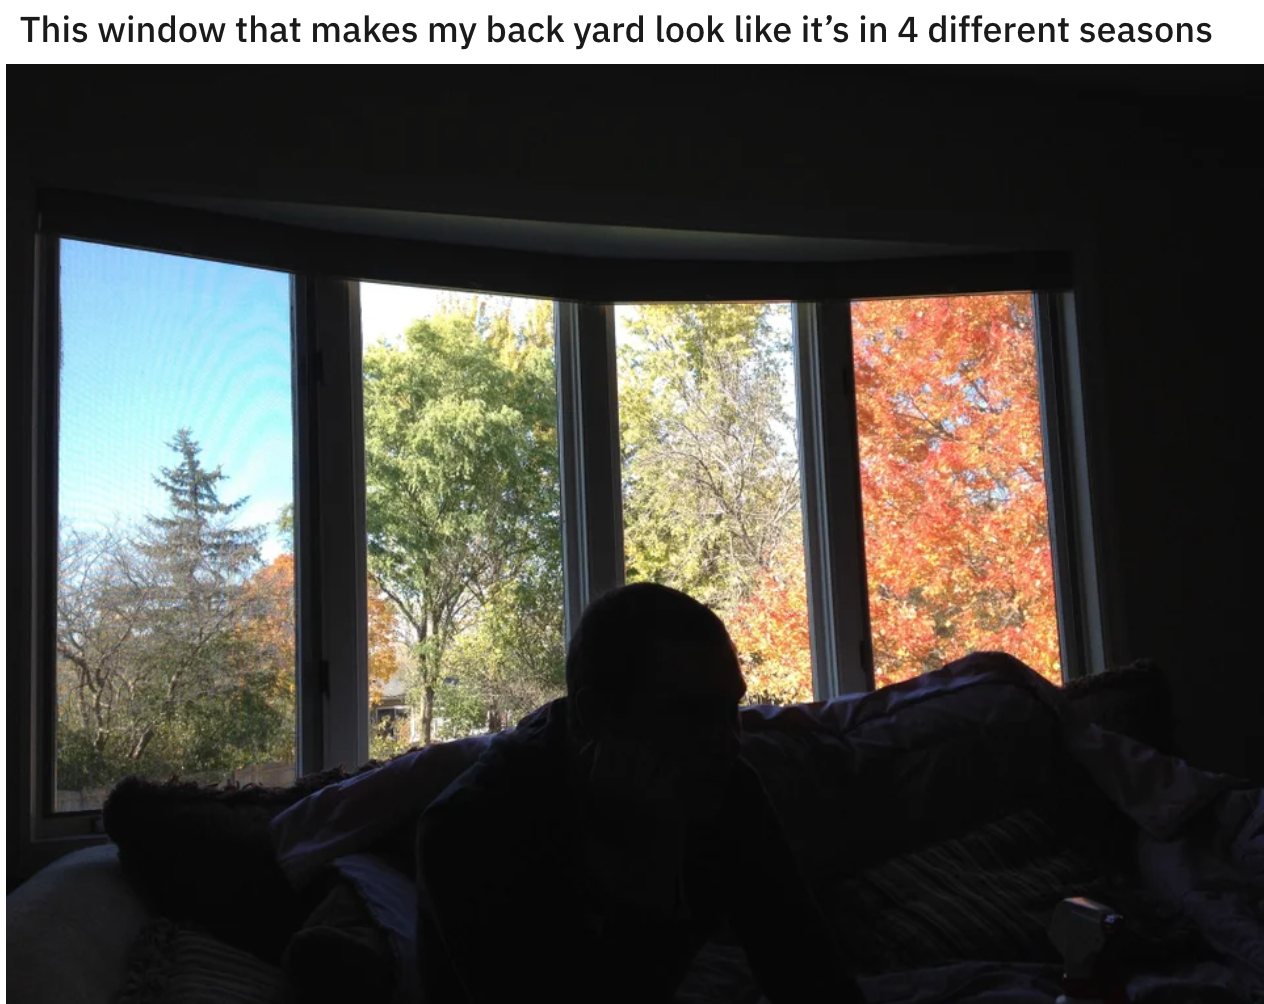 cool and funny pics - This window that makes my back yard look it's in 4 different seasons